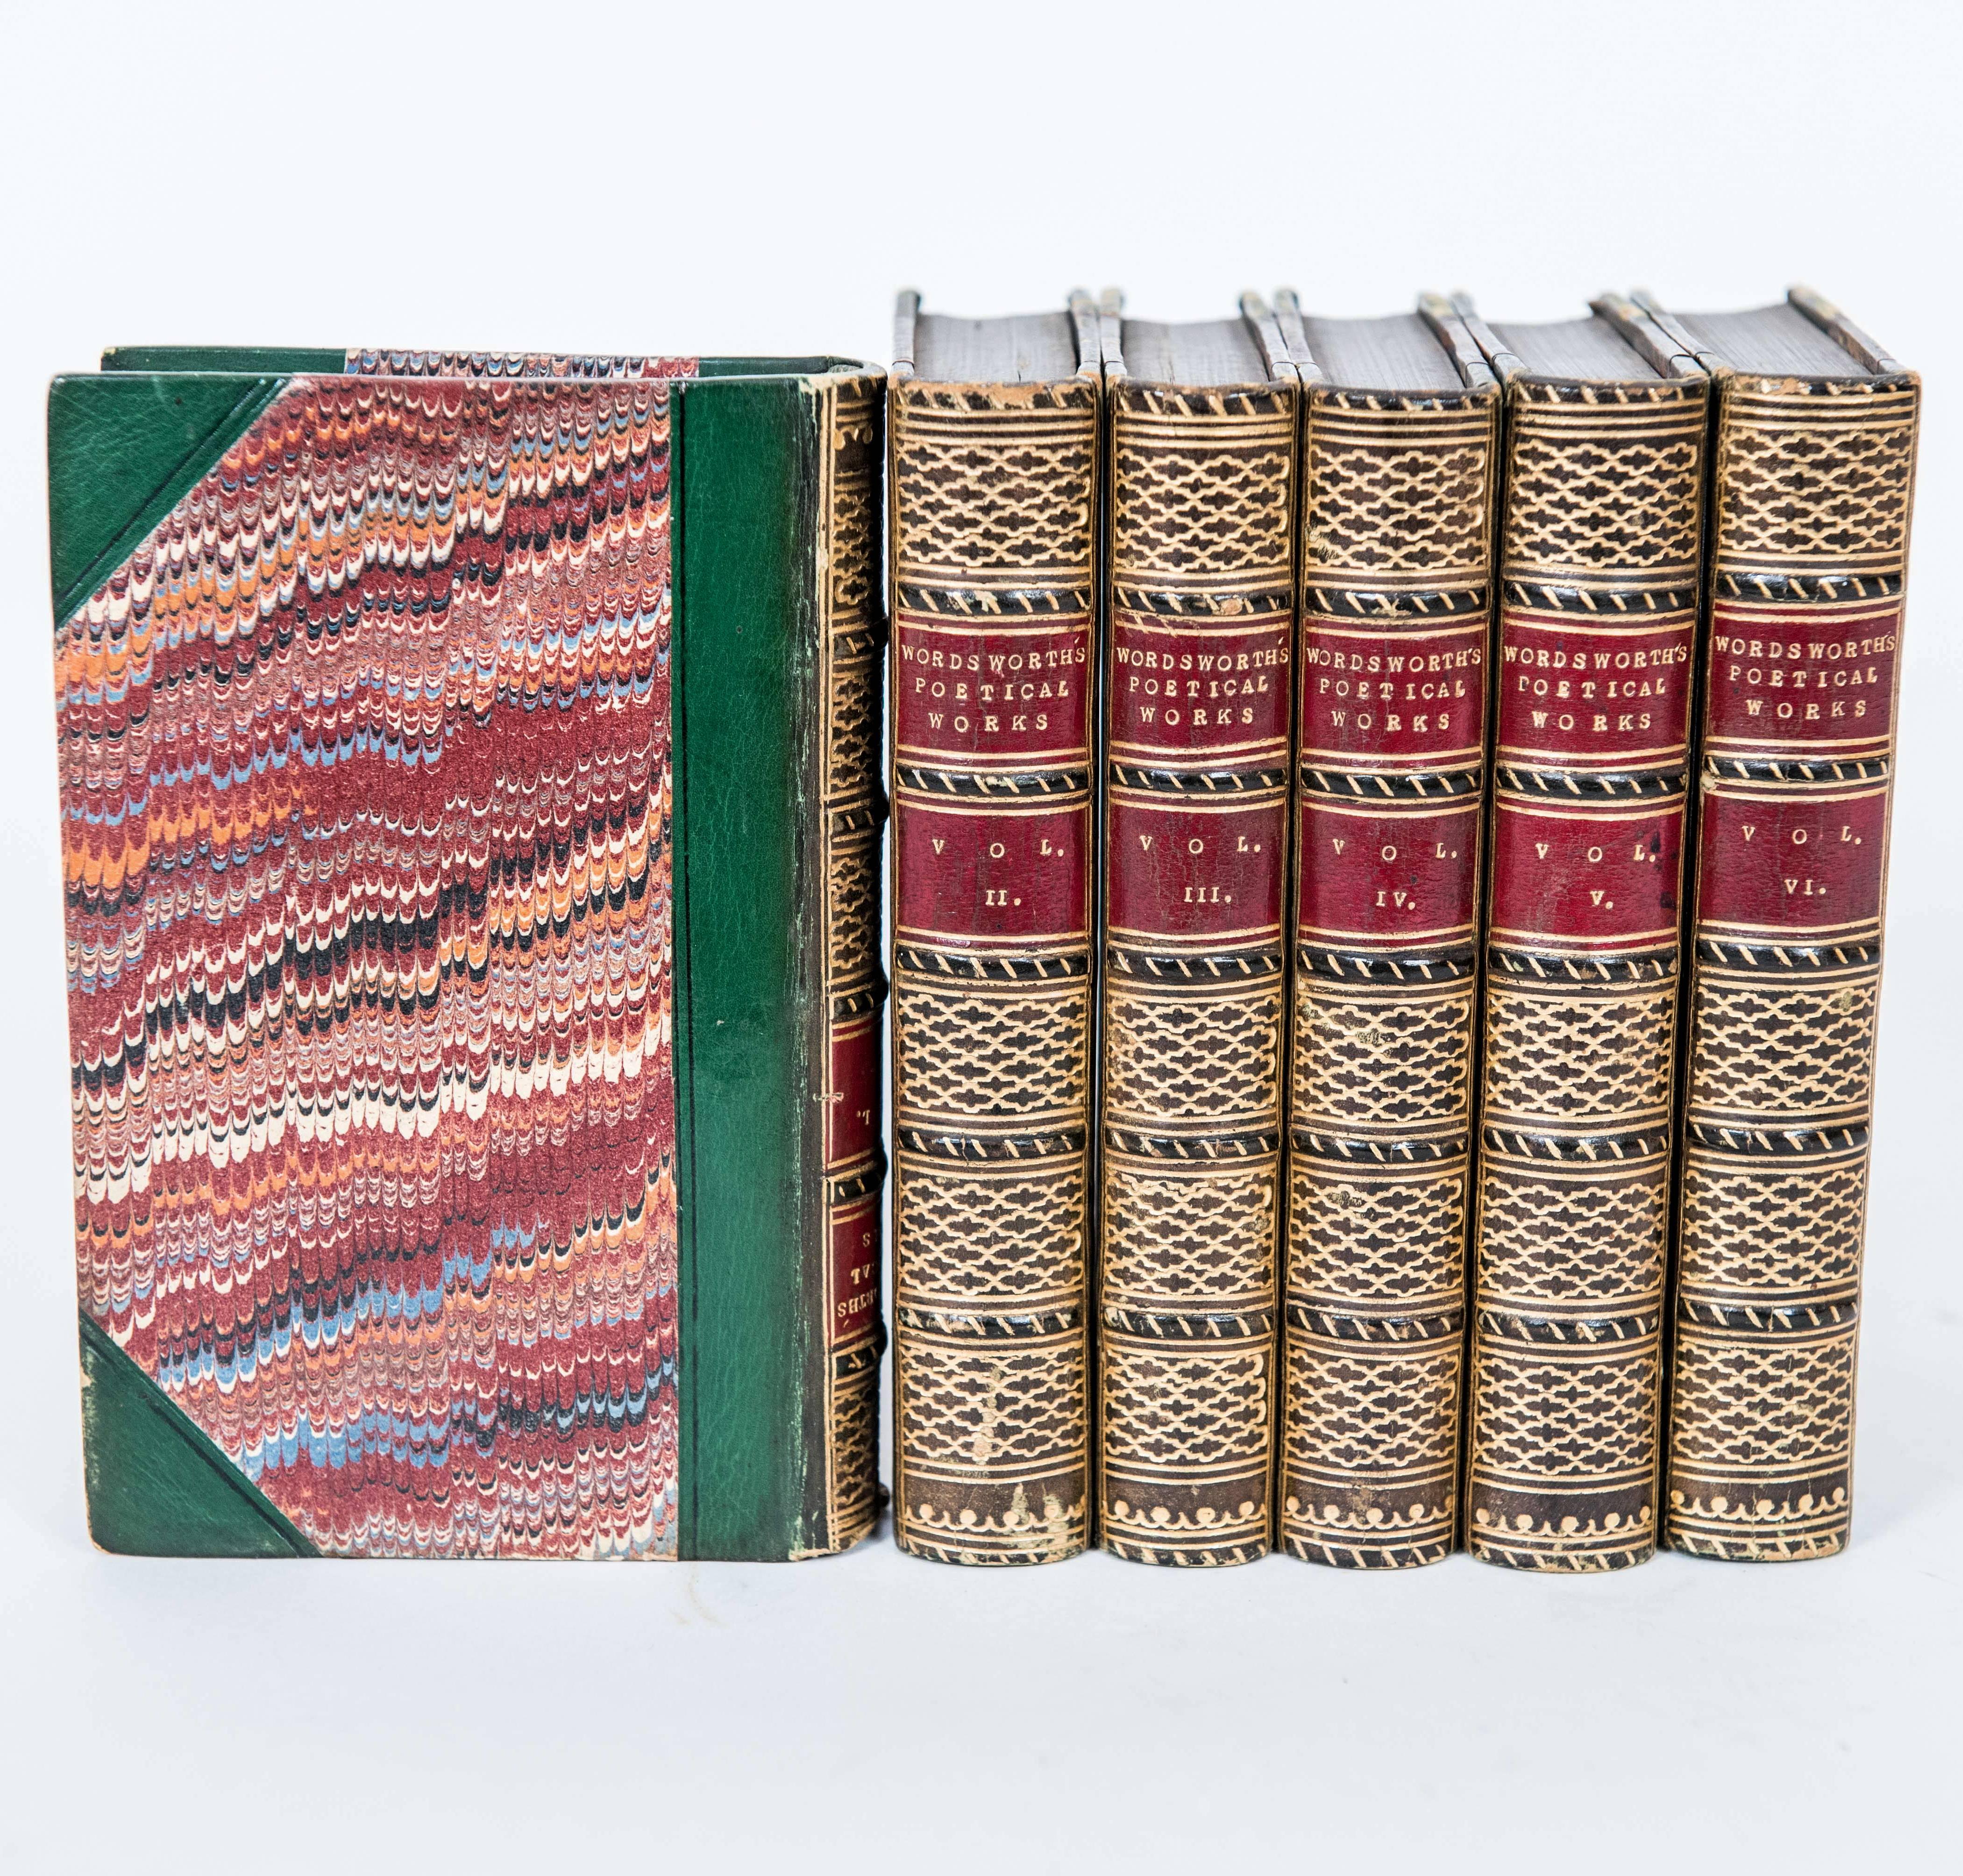 English Poetical Works of William Wordsworth in Six Volumes, Leather, circa 1849